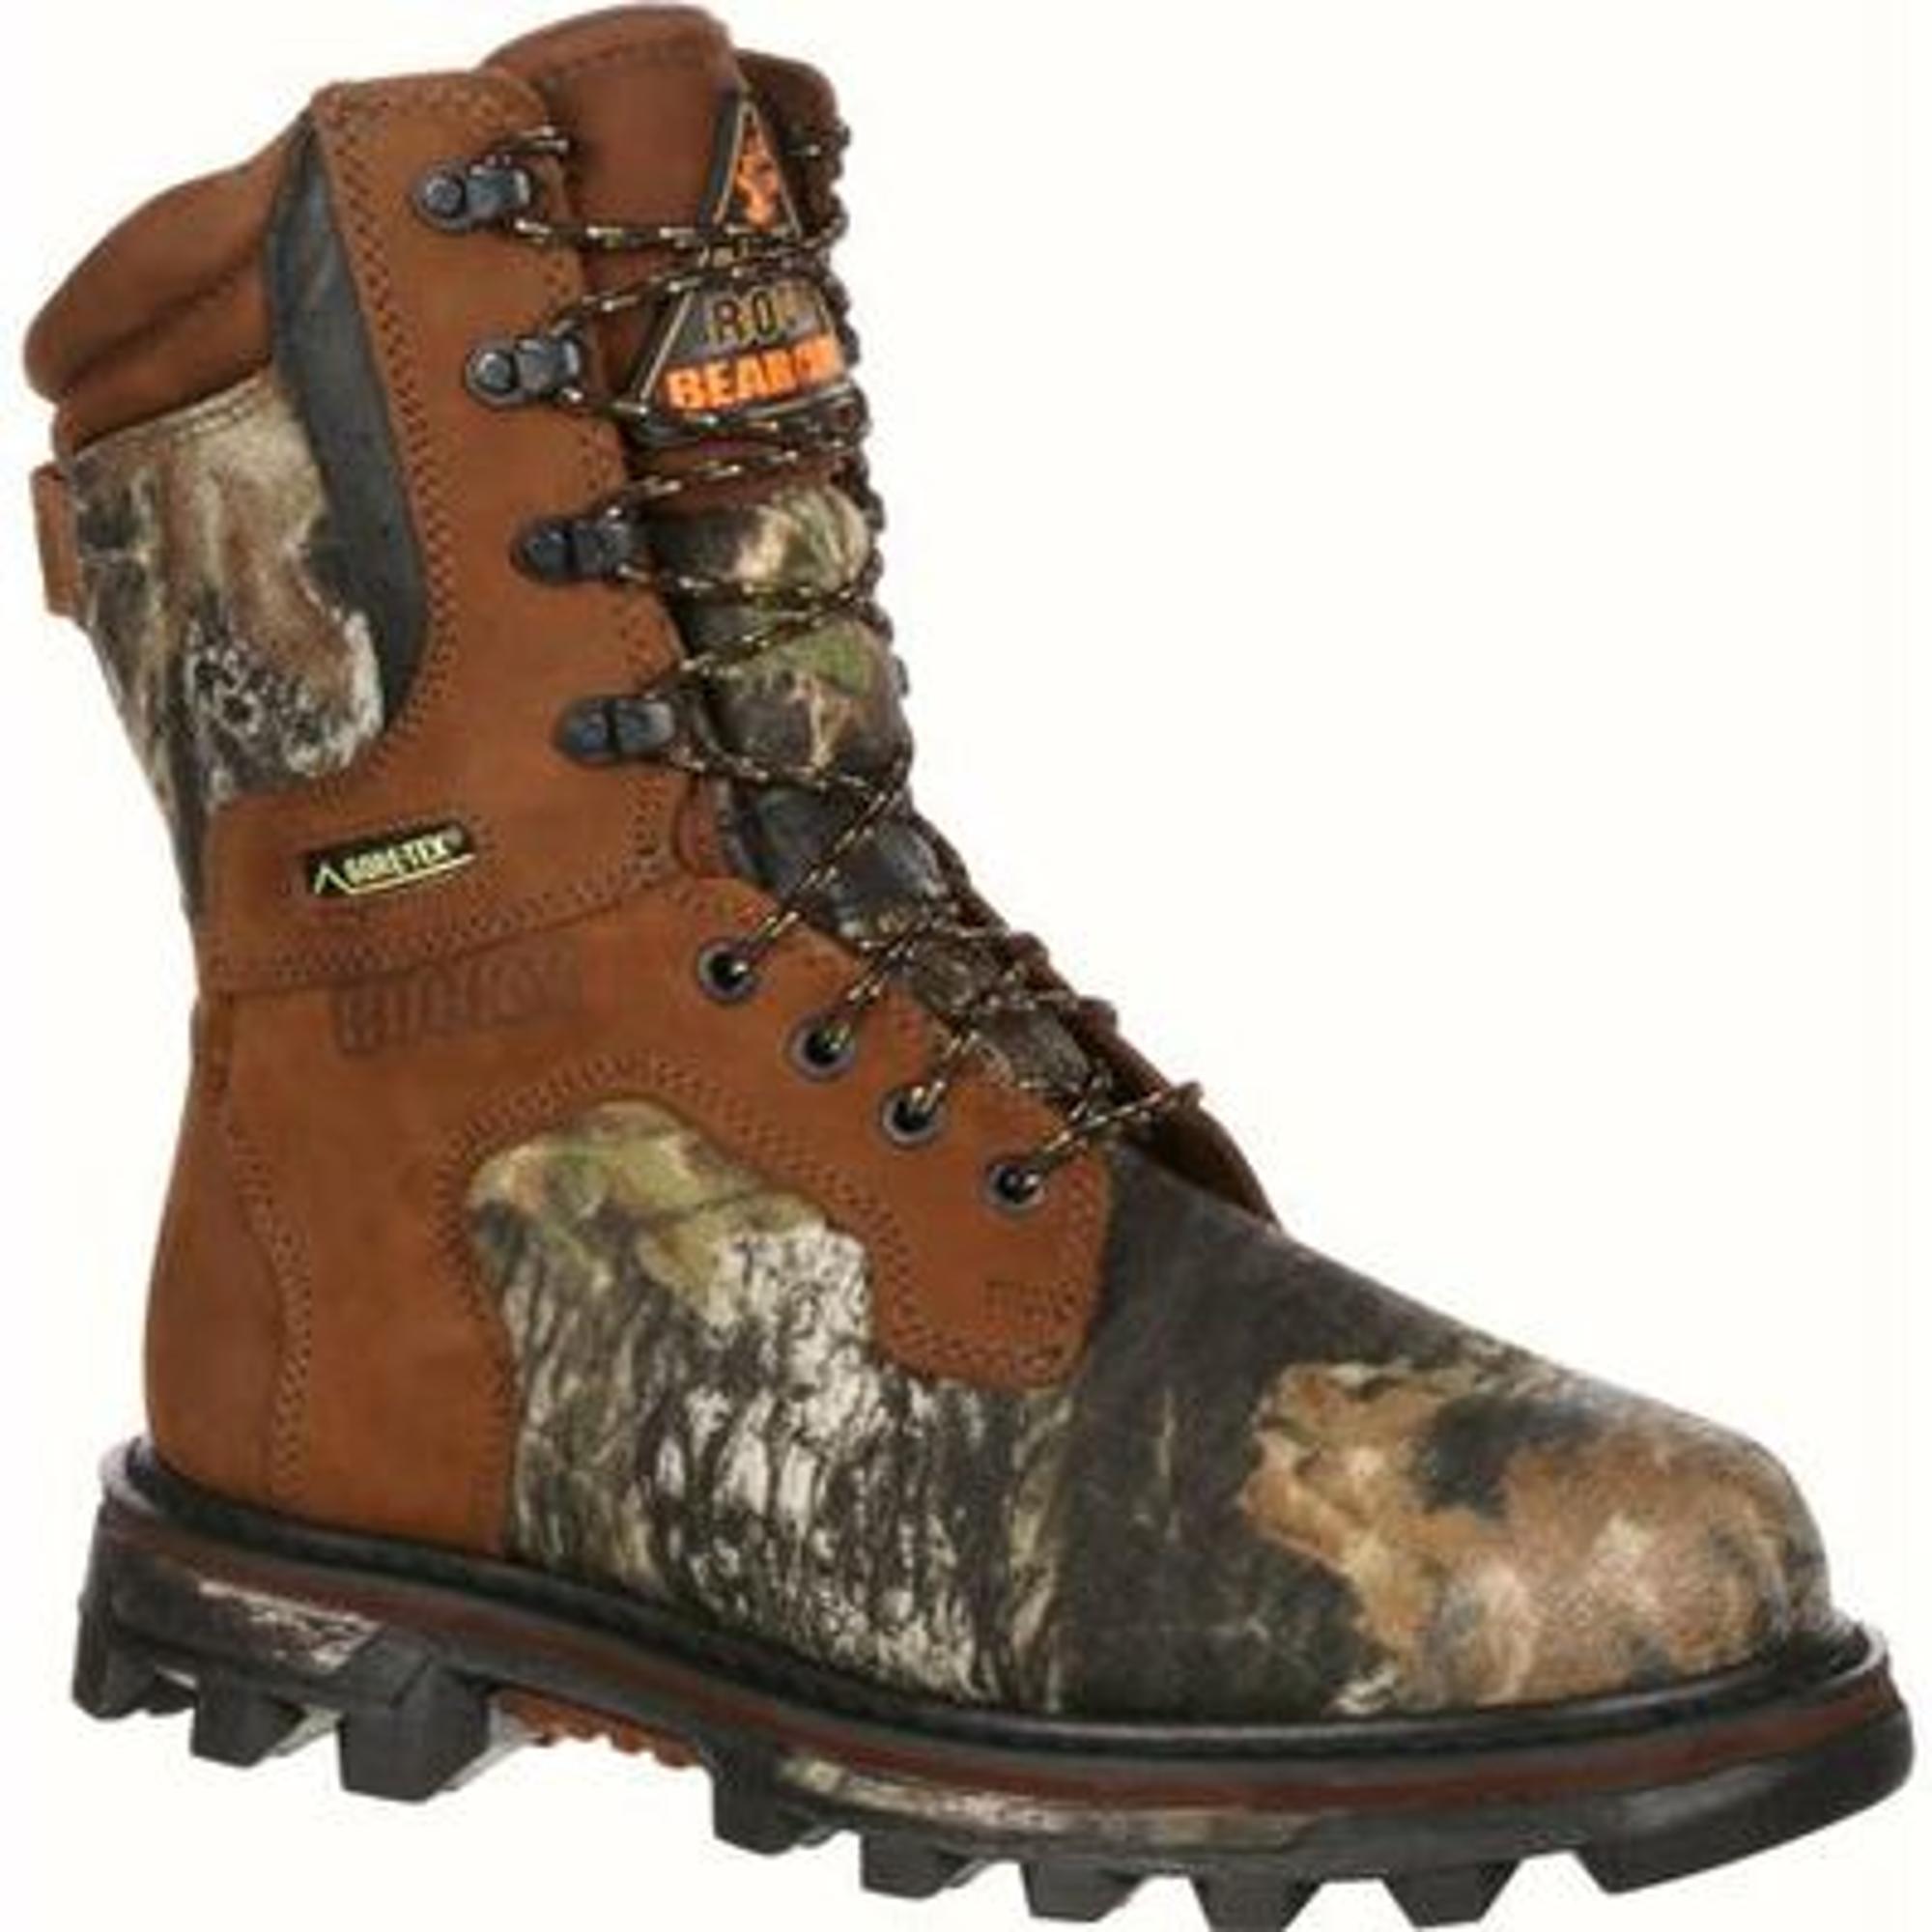 Rocky Bearclaw Gore- Tex Waterproof 1000g Insulated Hunting Boots